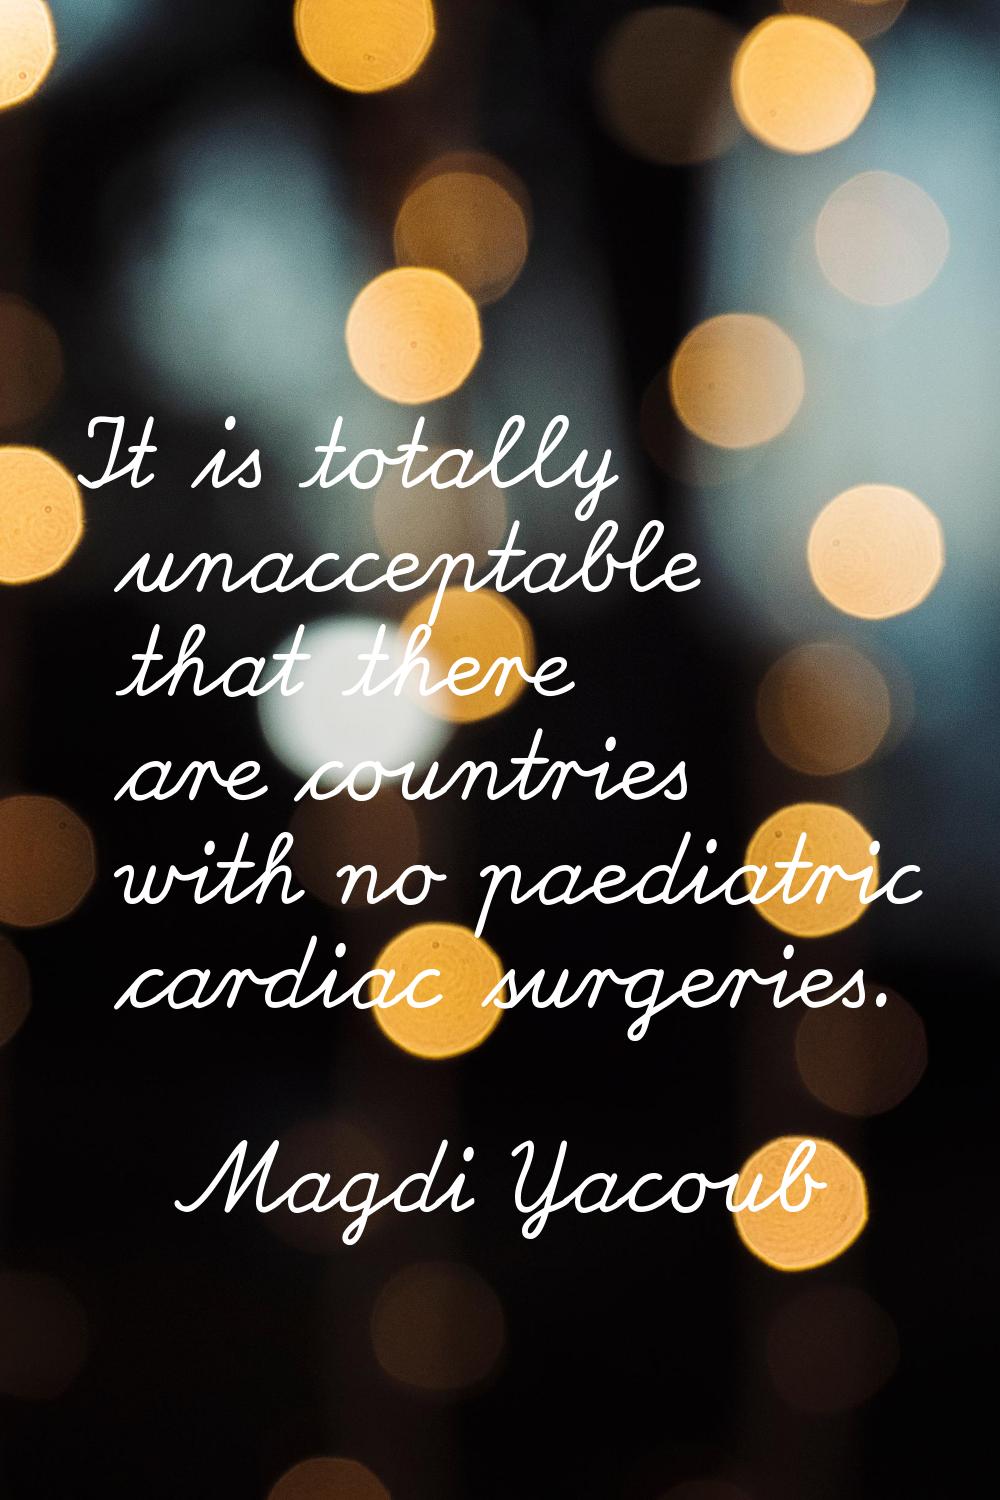 It is totally unacceptable that there are countries with no paediatric cardiac surgeries.